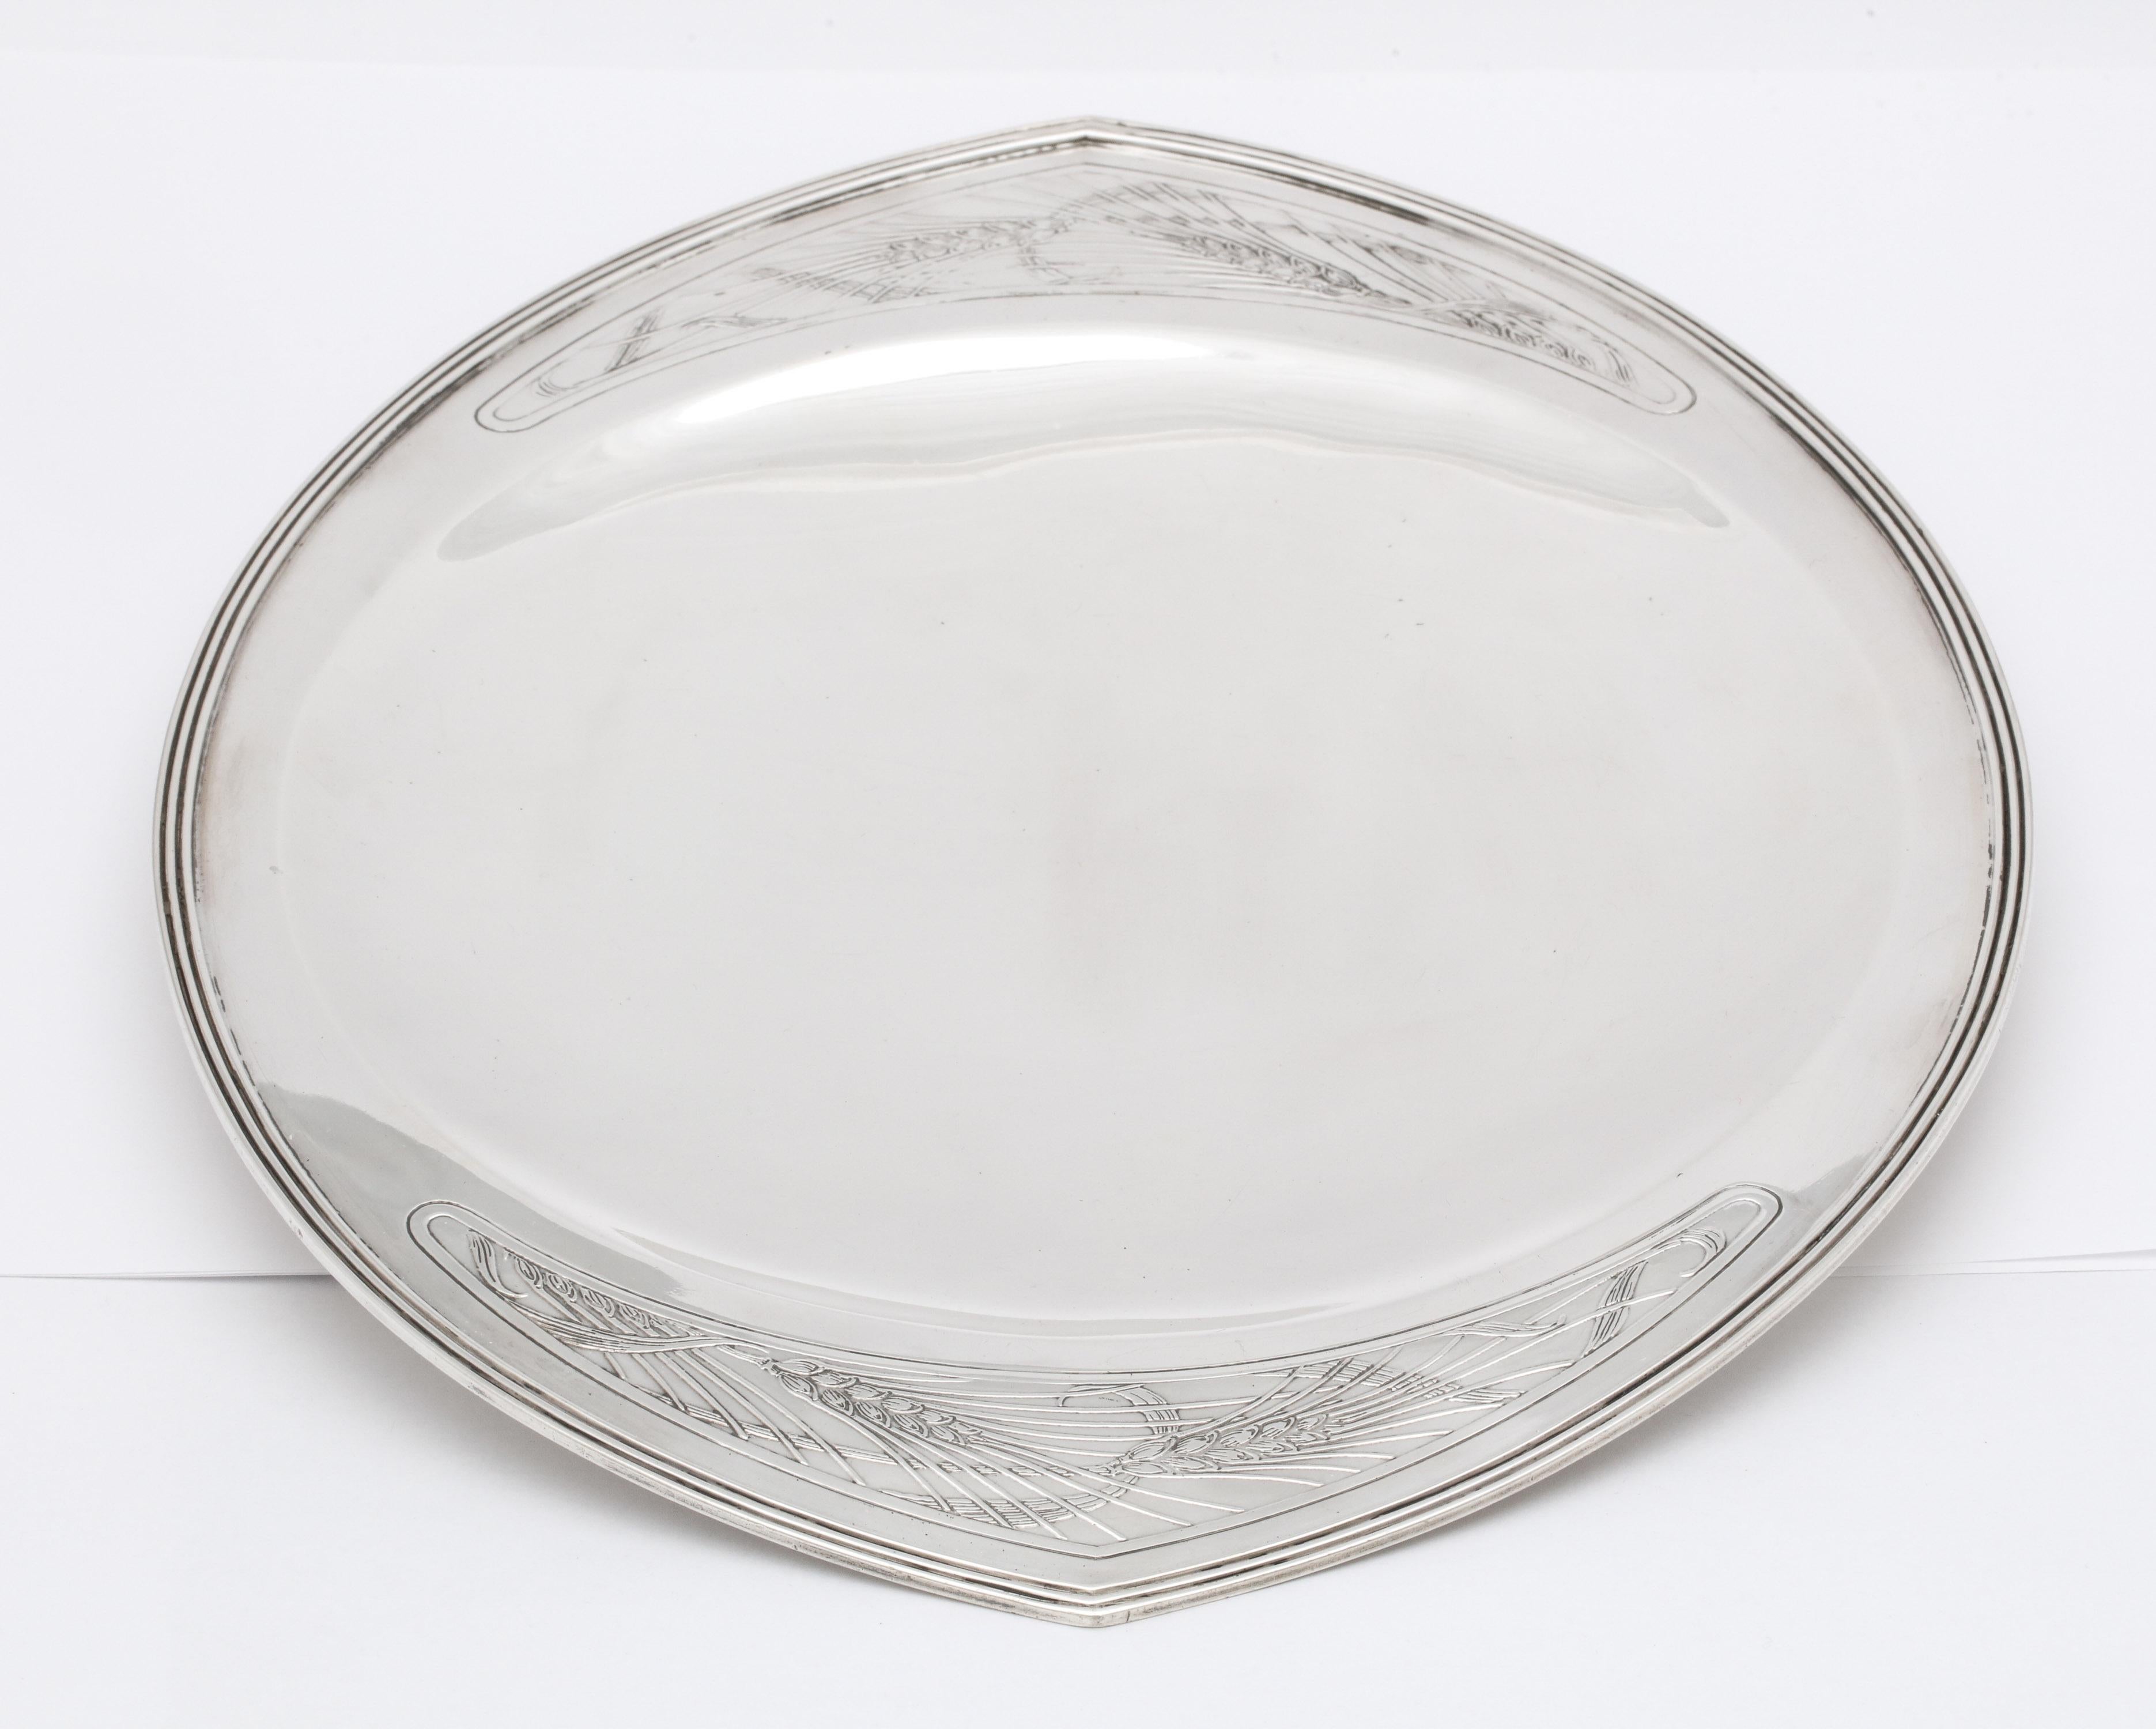 Rare Art Deco Tiffany Sterling Silver Tray on Low Pedestal Base  For Sale 3